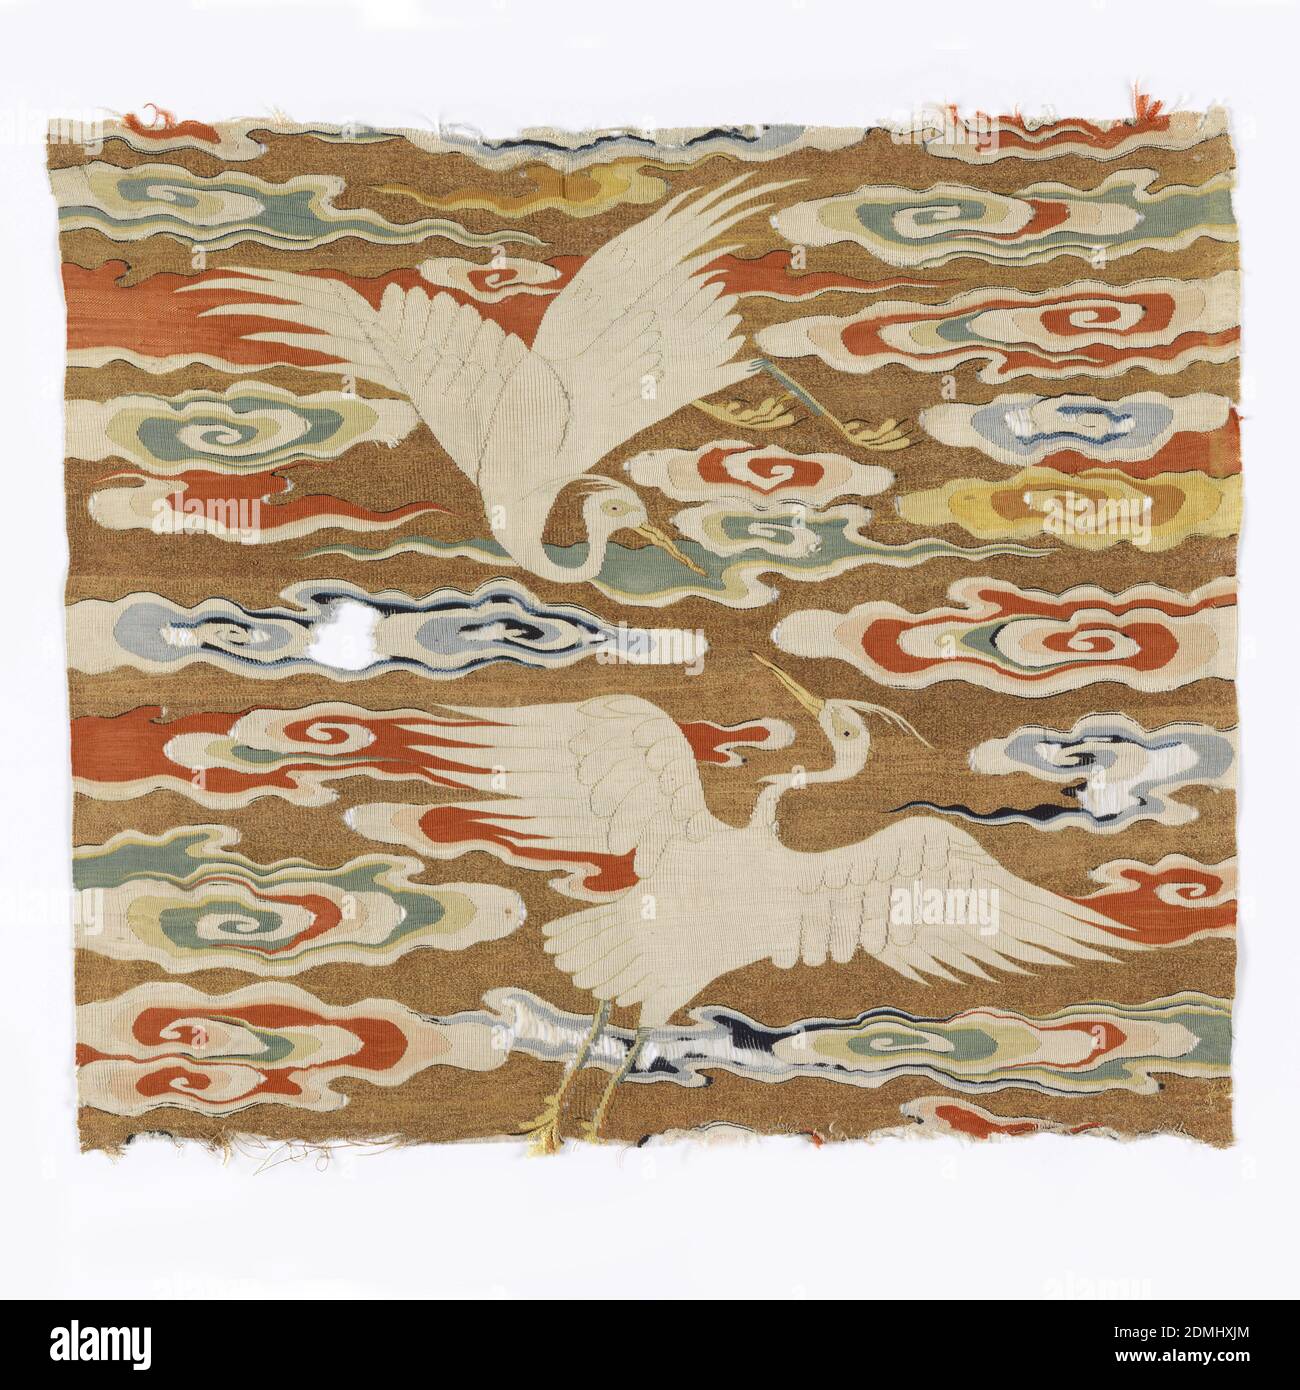 Rank badge, Medium: silk, metallic yarns Technique: plain weave with discontinuous wefts (tapestry or k'ossu), open slits, Most of a Ming dynasty Sixth Rank square showing a pair of egrets with spread wings arched across a gold sky filled with brightly colored attenuated cloud streamers. Birds are white with the characteristic slender head plume, yellow beak, feet and eyes, with pale green details. Cloud bands are white with shades of blue, pale green, yellow and vermillion on a gold metallic ground., China, Ming dynasty, 1368–1644, woven textiles, Rank badge Stock Photo